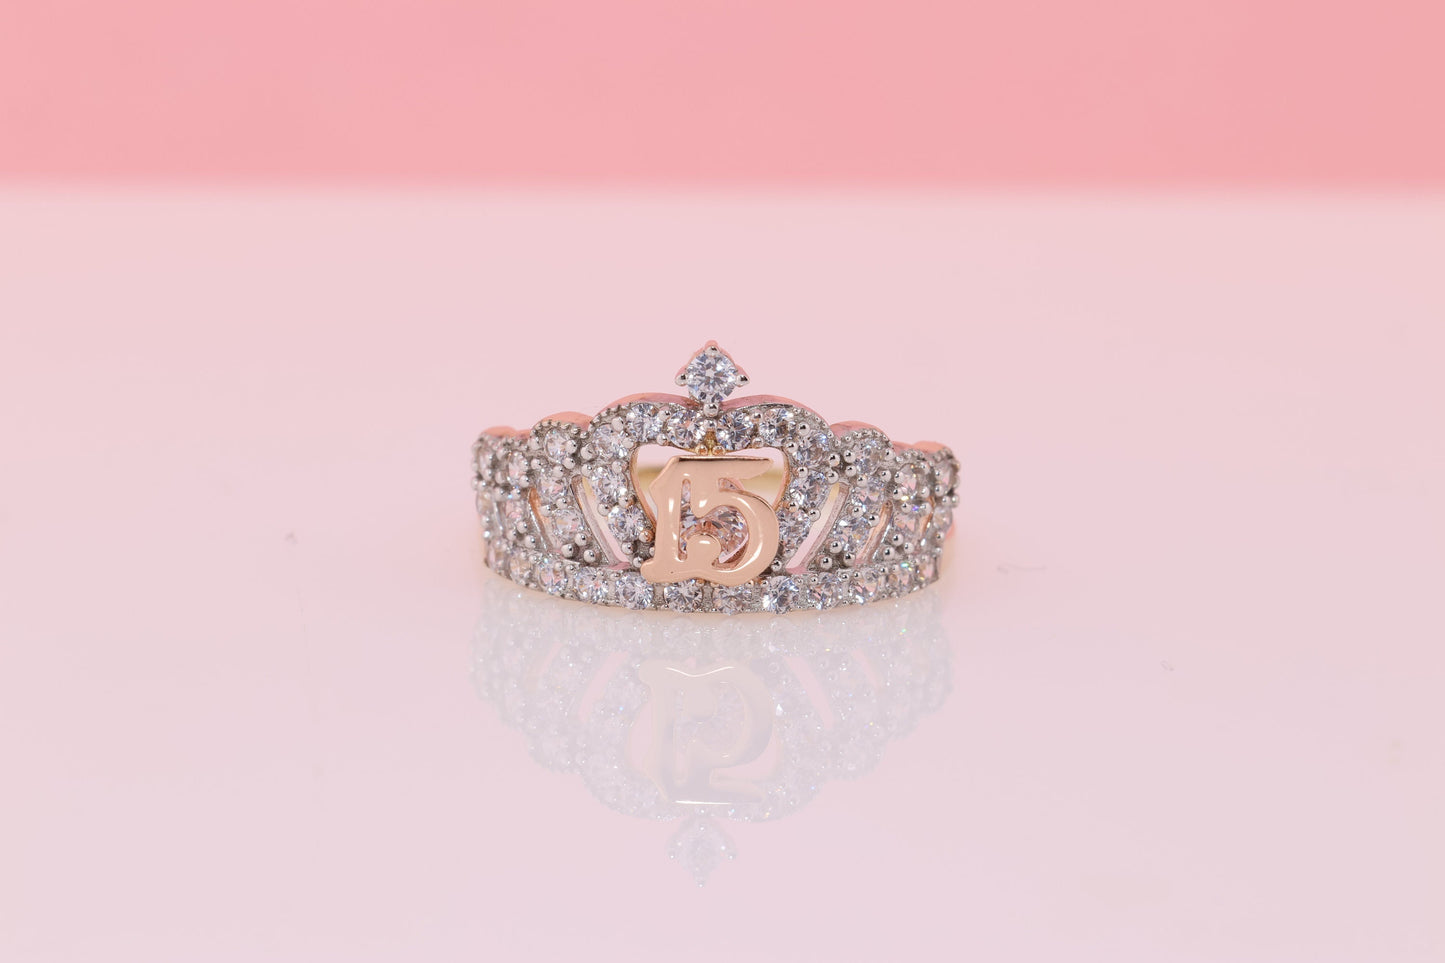 14K Gold 15 Anos Quinceanera Crown Ring WW